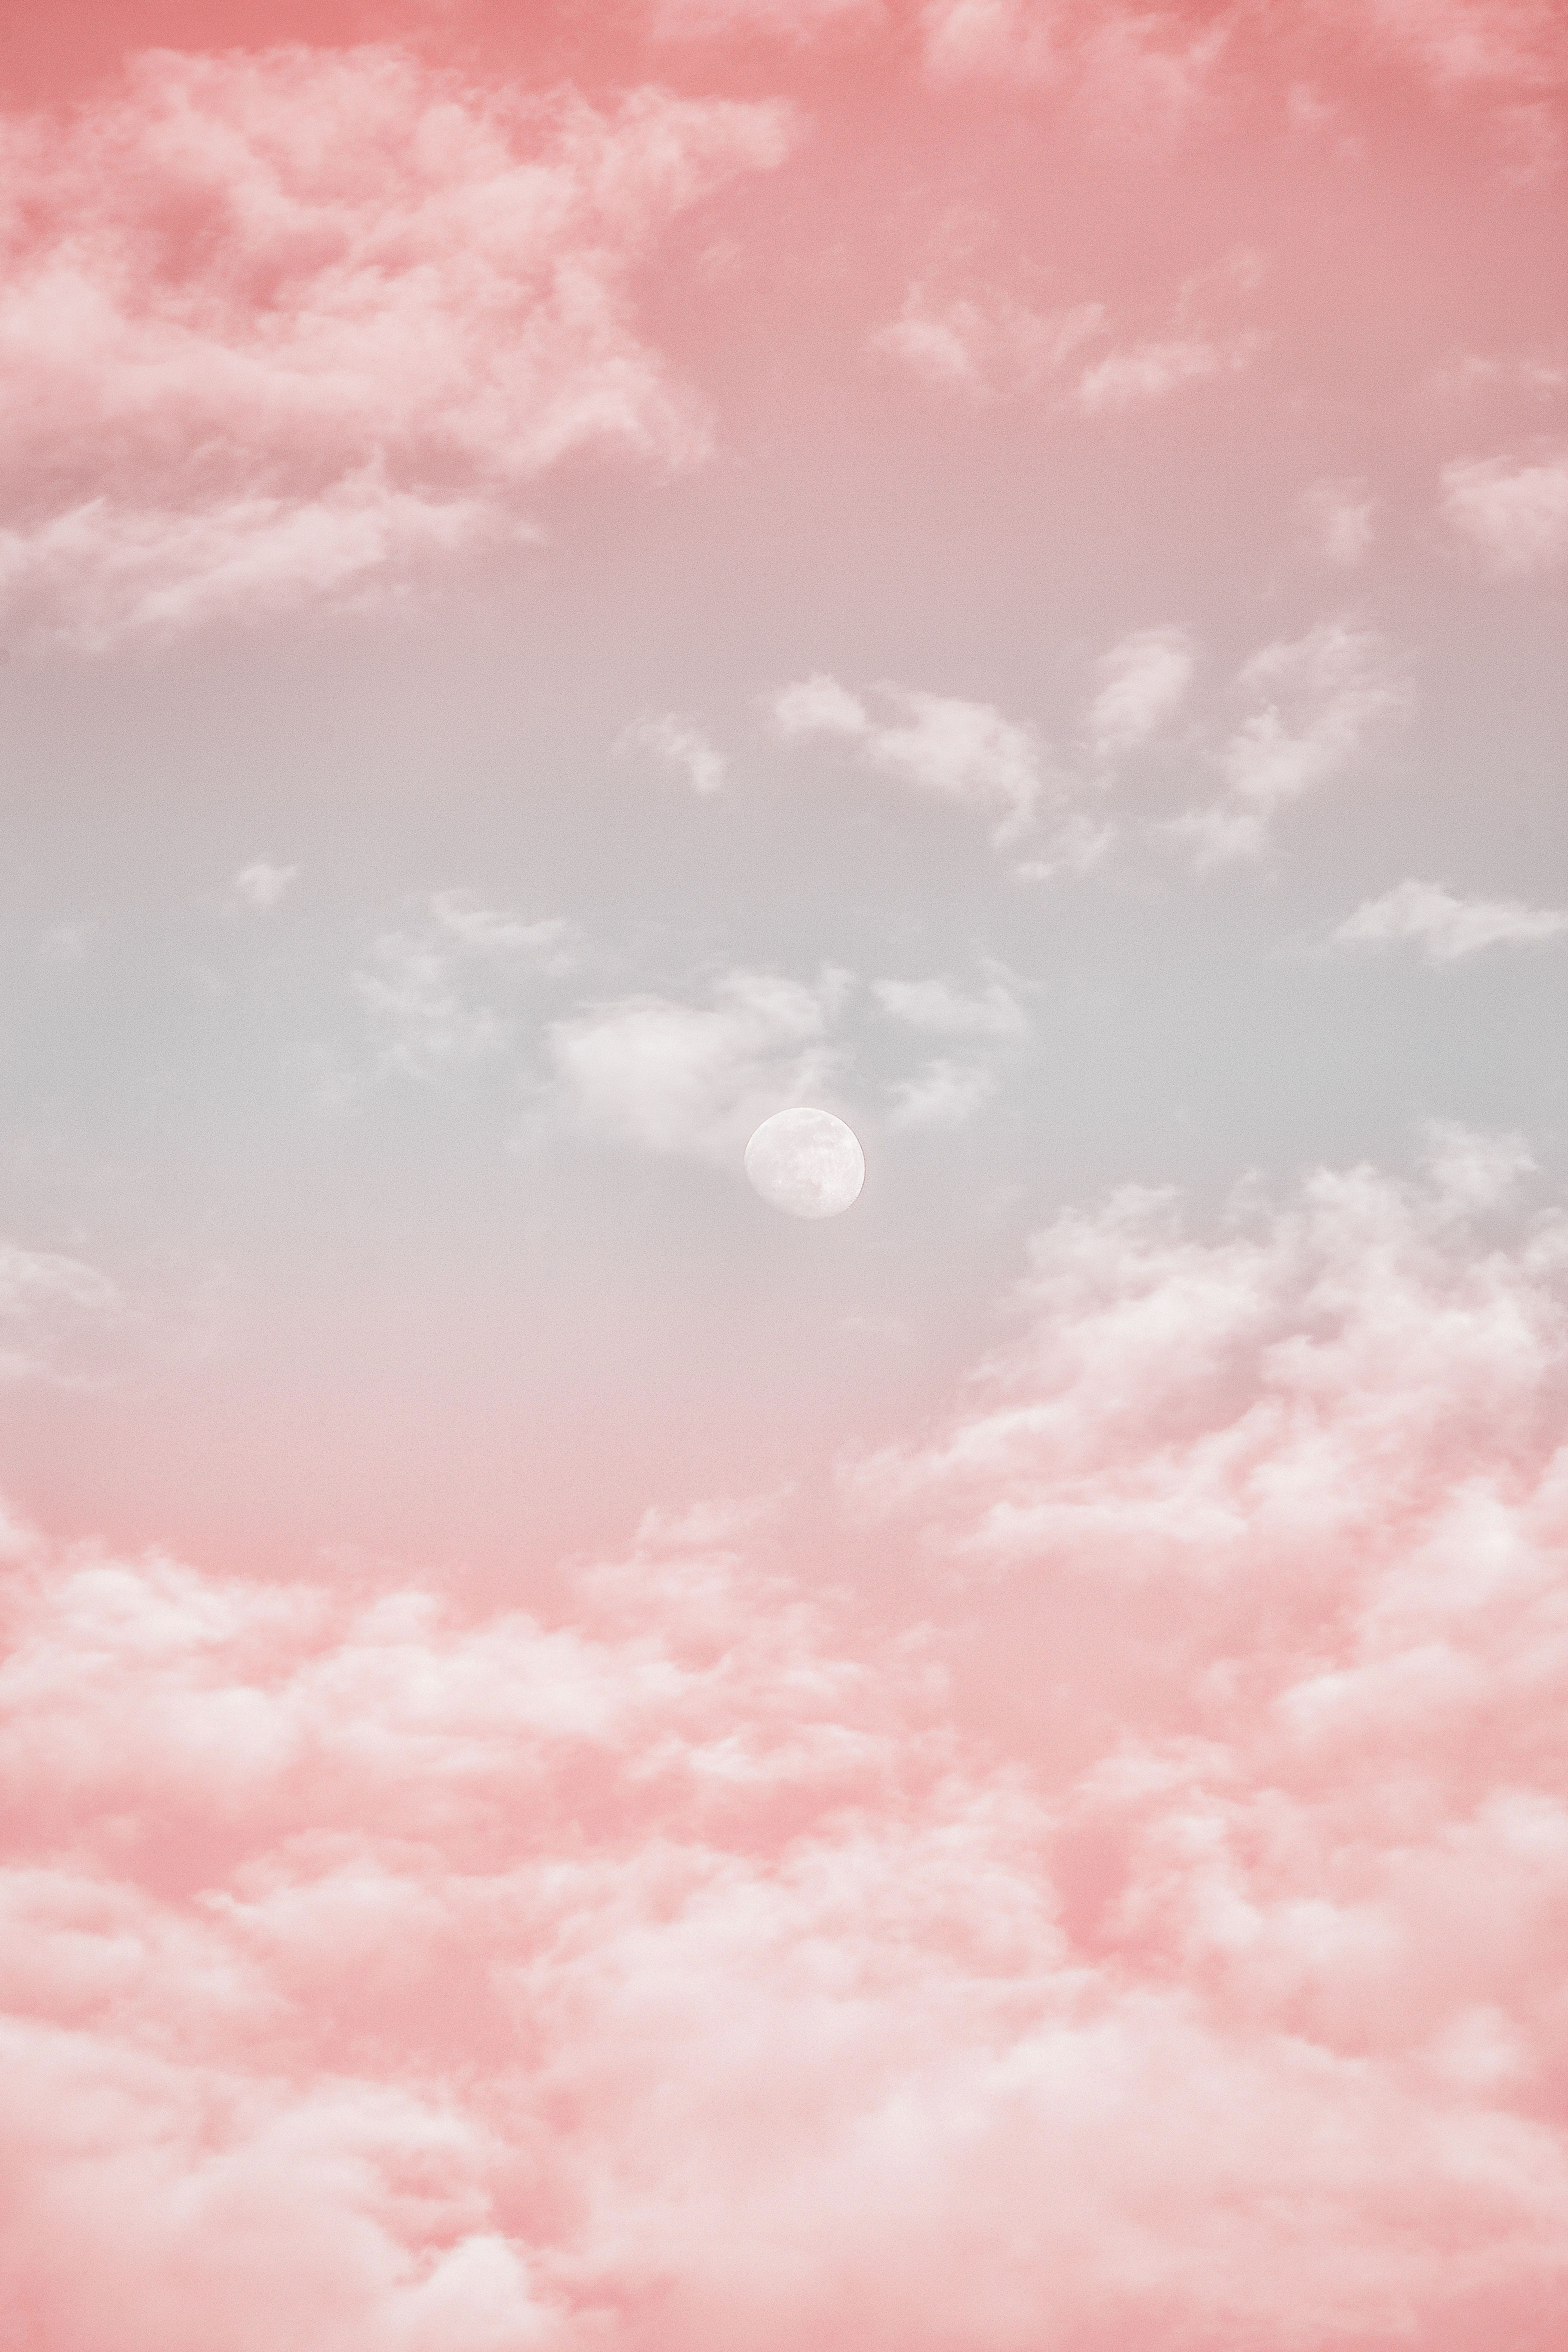 A pink and blue sky with a full moon - Cloud